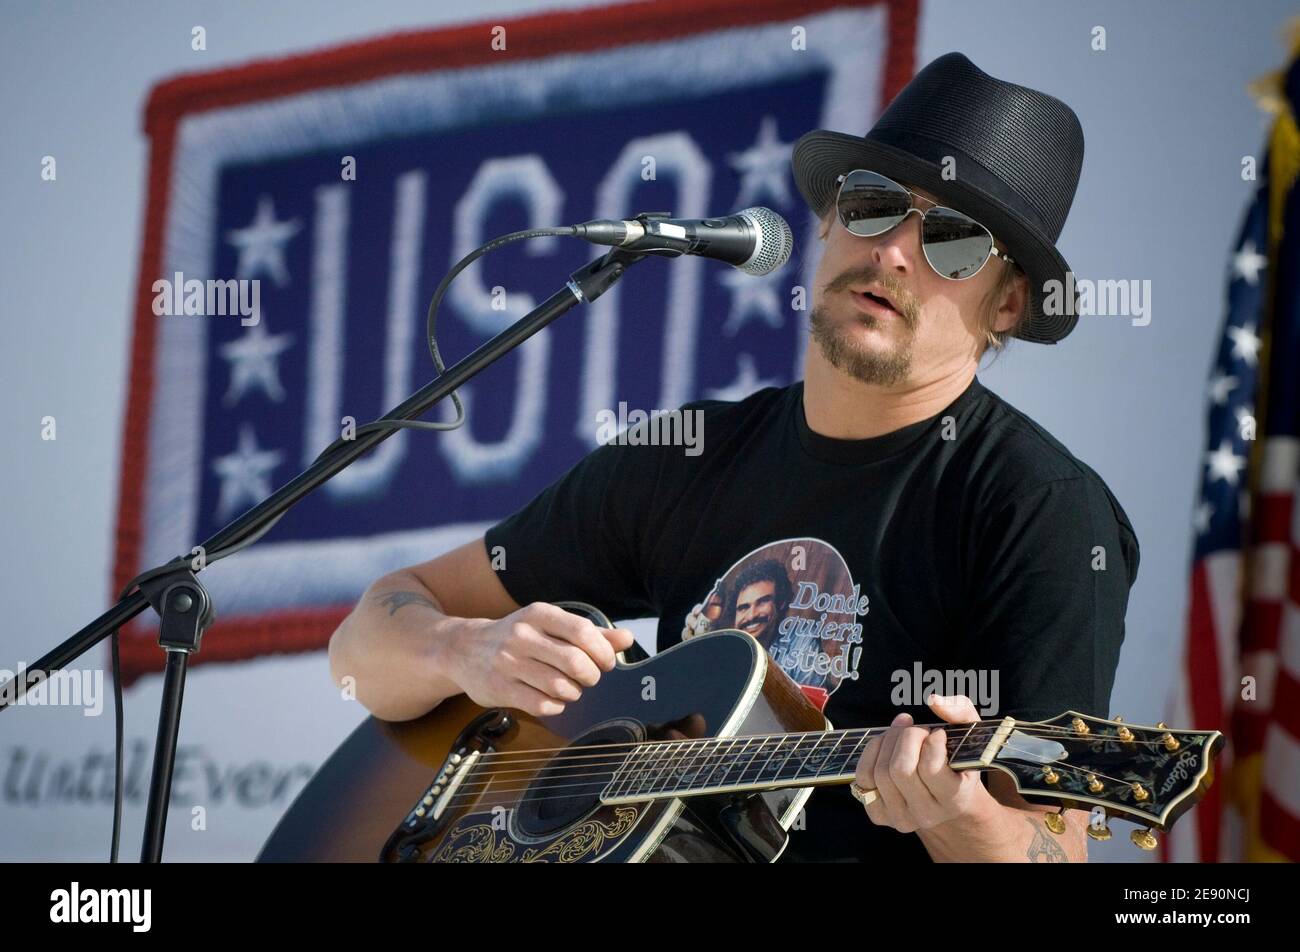 Kid Rock performs at the USO Holiday Tour stop at Logistics Support Area Anaconda in Balad, Iraq, on December 20, 2007. Photo by DOD via ABACAPRESS.COM Stock Photo